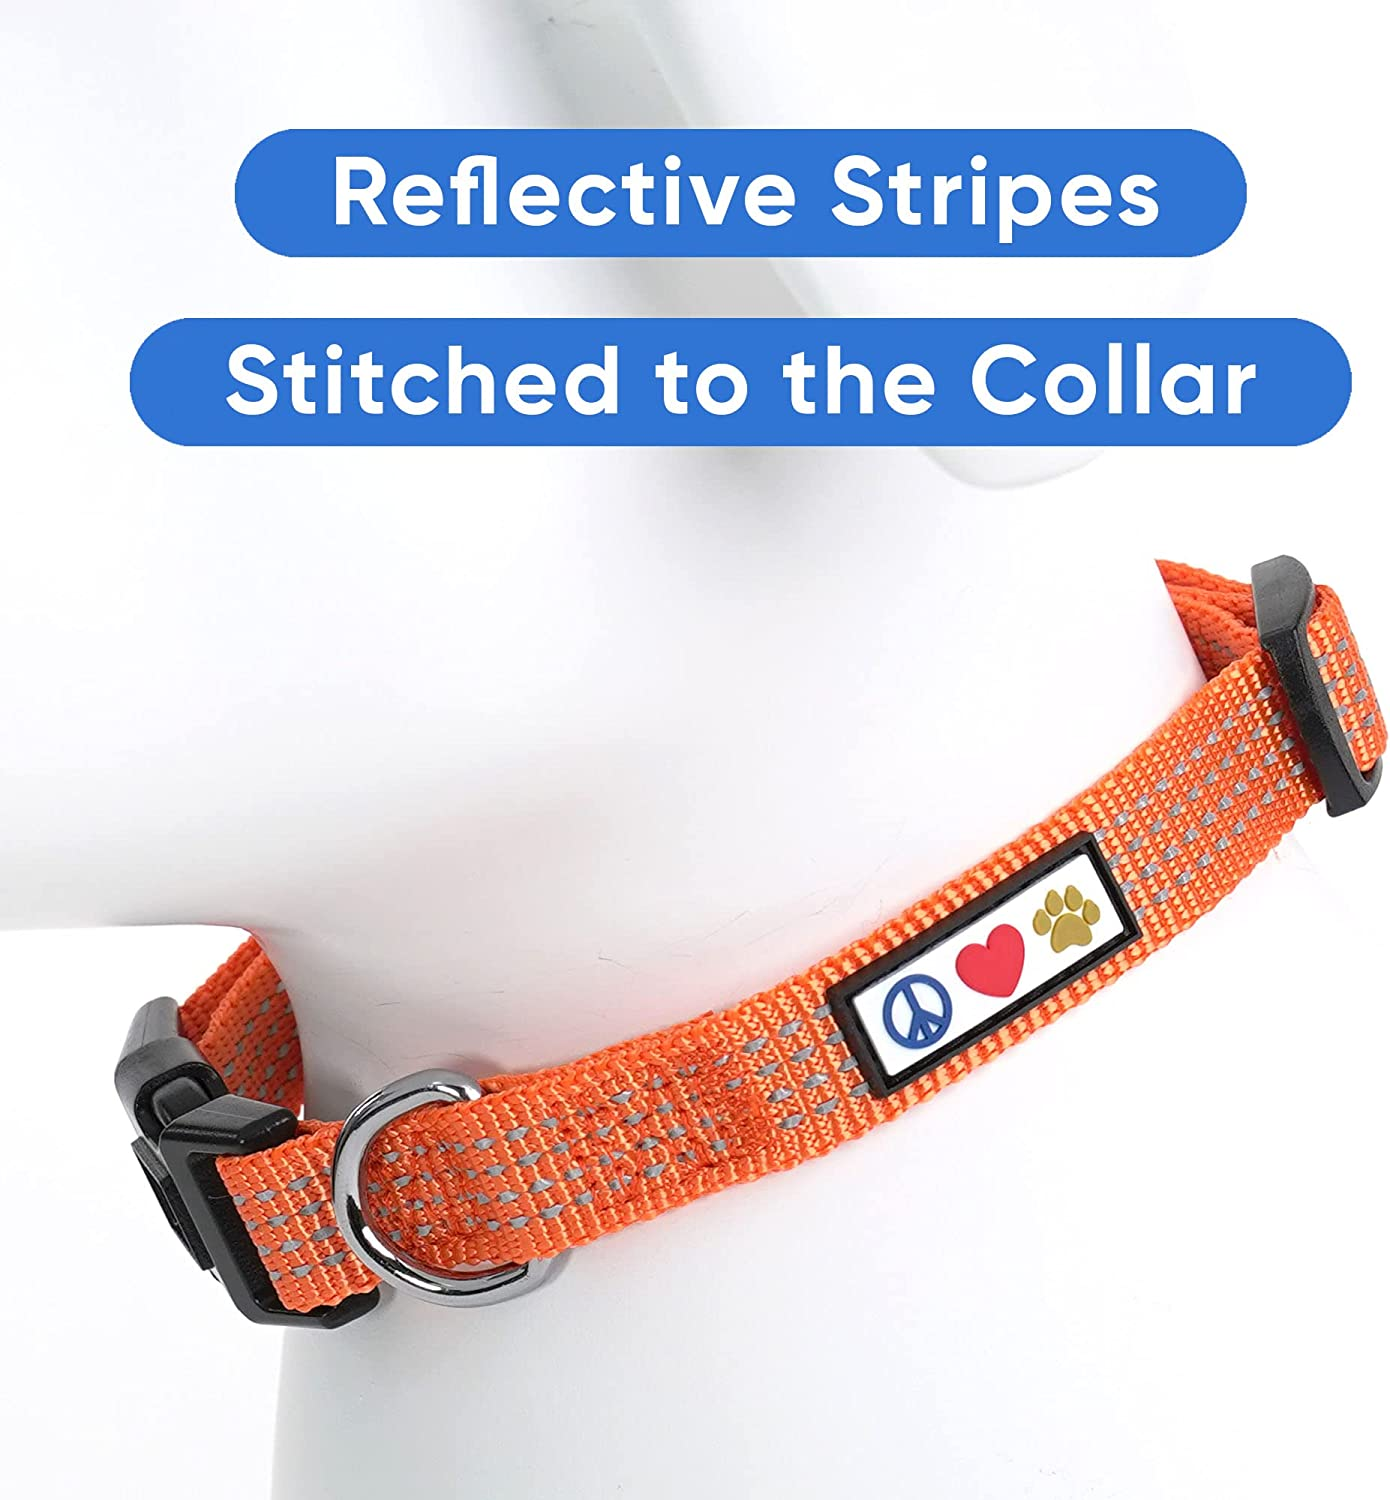 Reflective Dog Collar with Stitching Reflective Thread | Reflective Dog Collar with Buckle Adjustable and Better Great Collar for Small Dogs Extra Small Puppy Medium Large Breeds